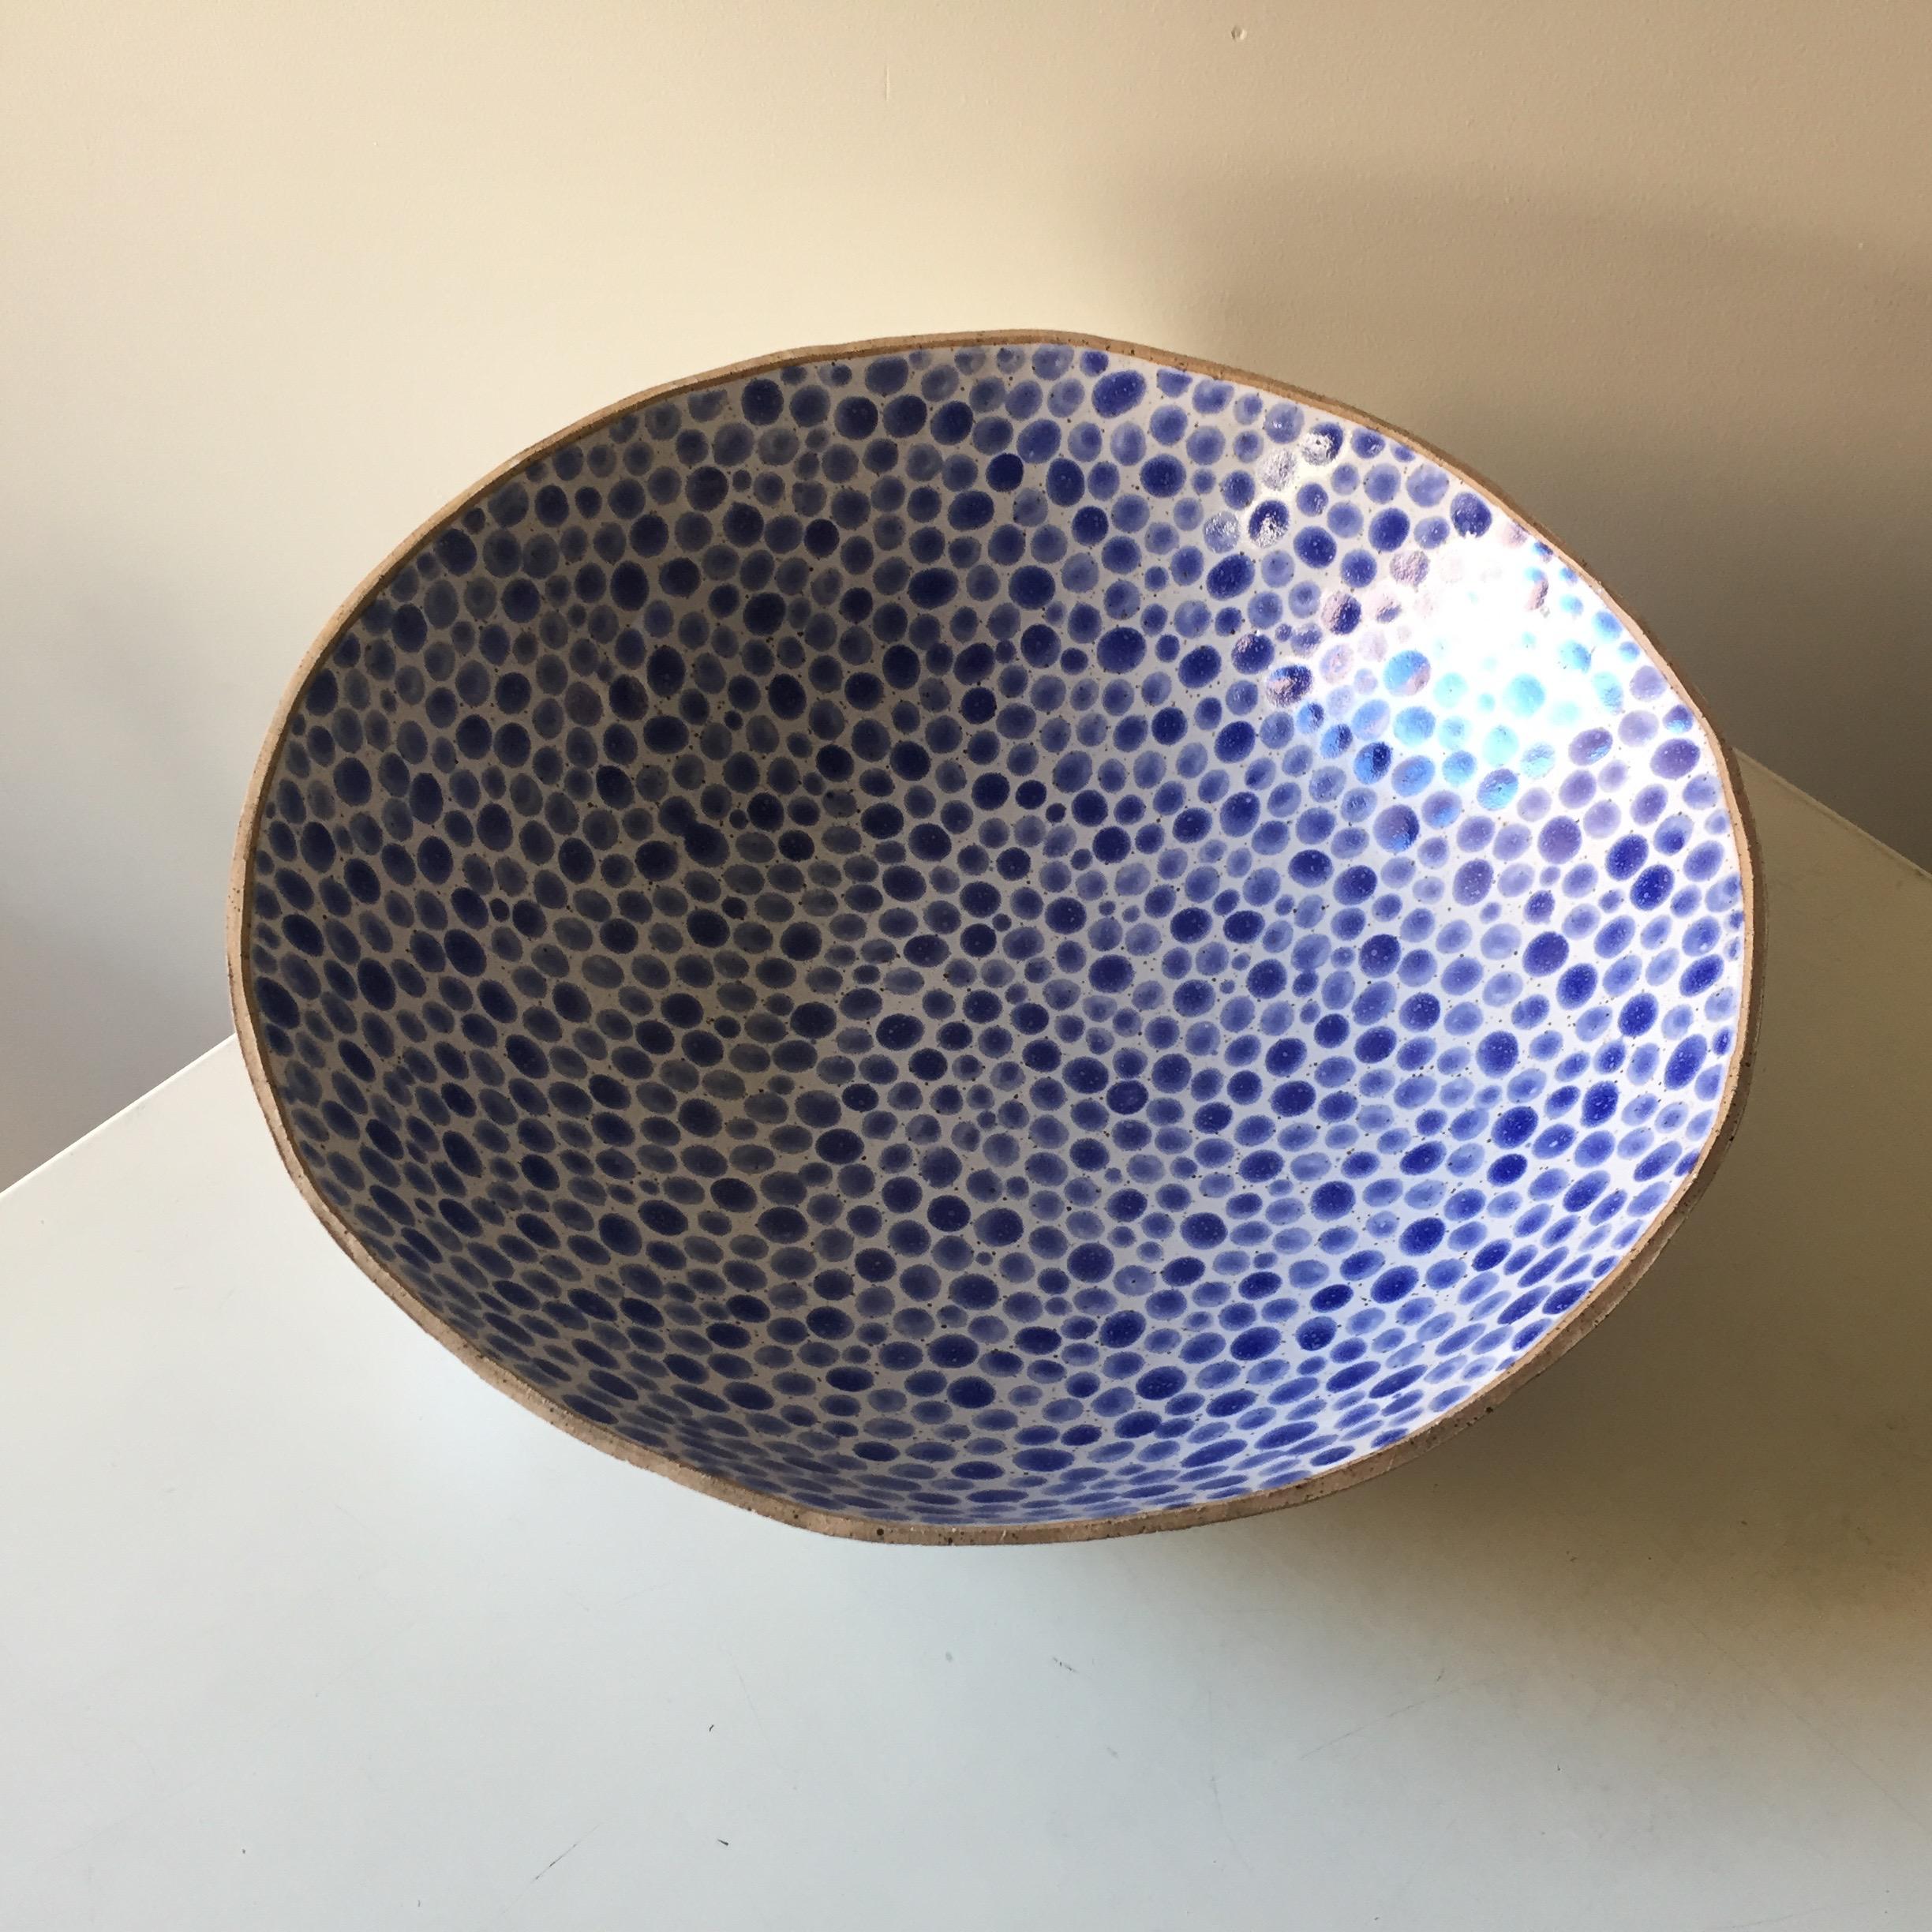 Stoneware bowl hand painted with blue glaze. Made in Tribeca NYC by Lana Kova.